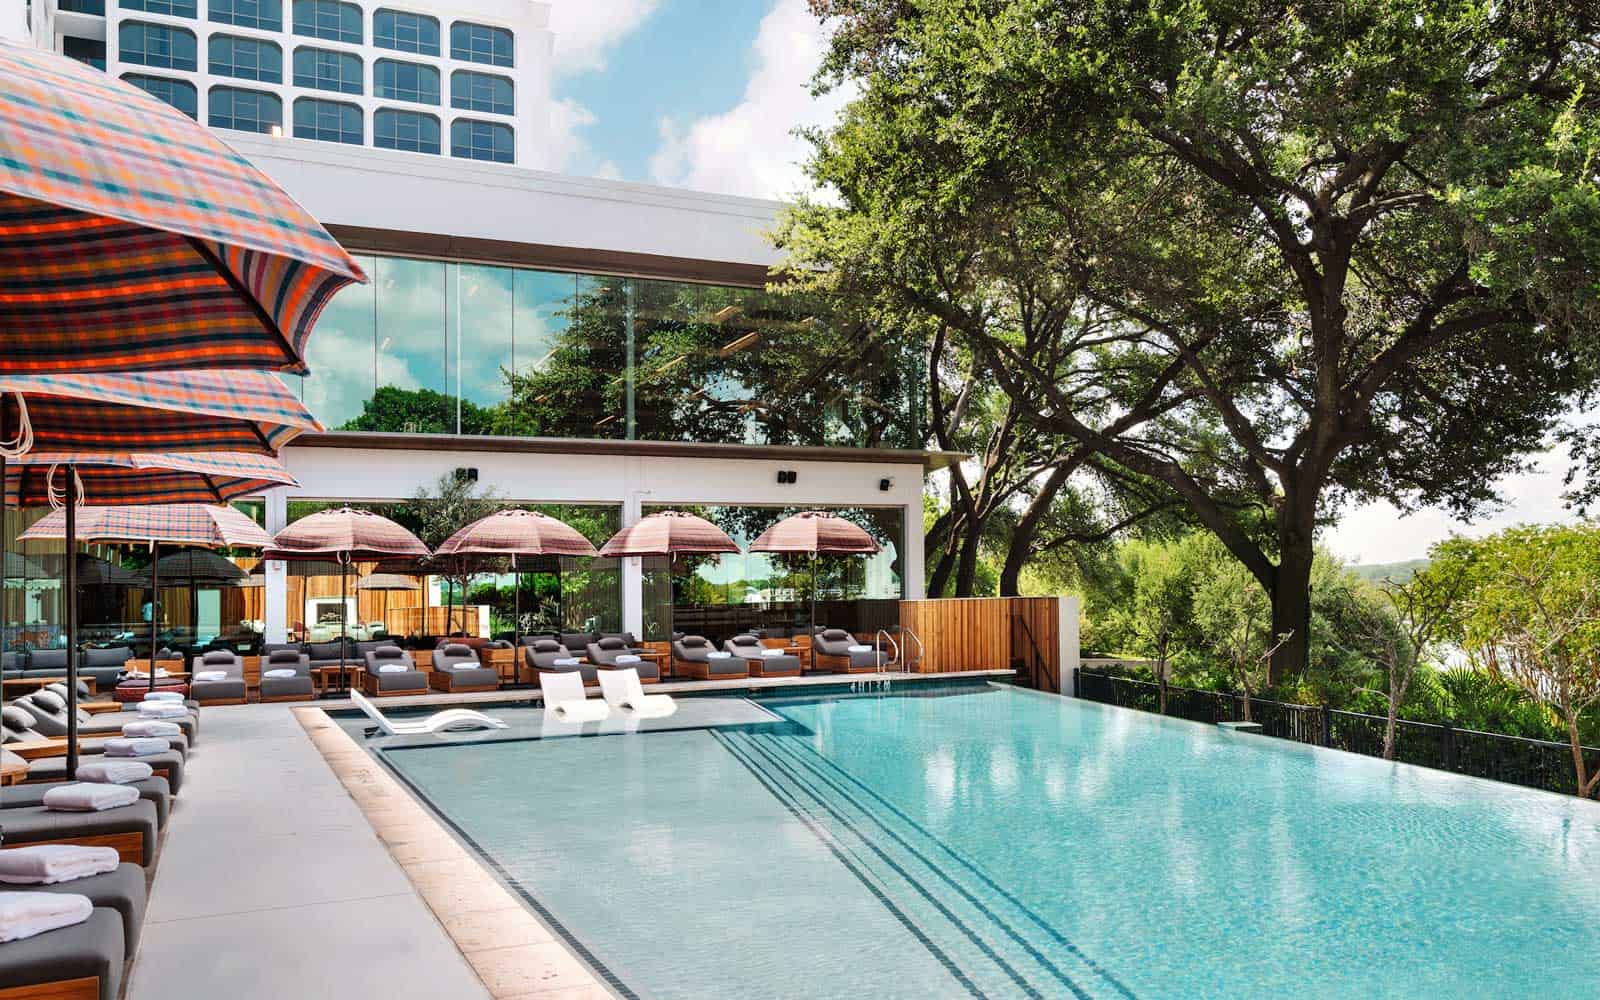 Top 5 Hotel Pool Passes in Austin - 44 East Ave